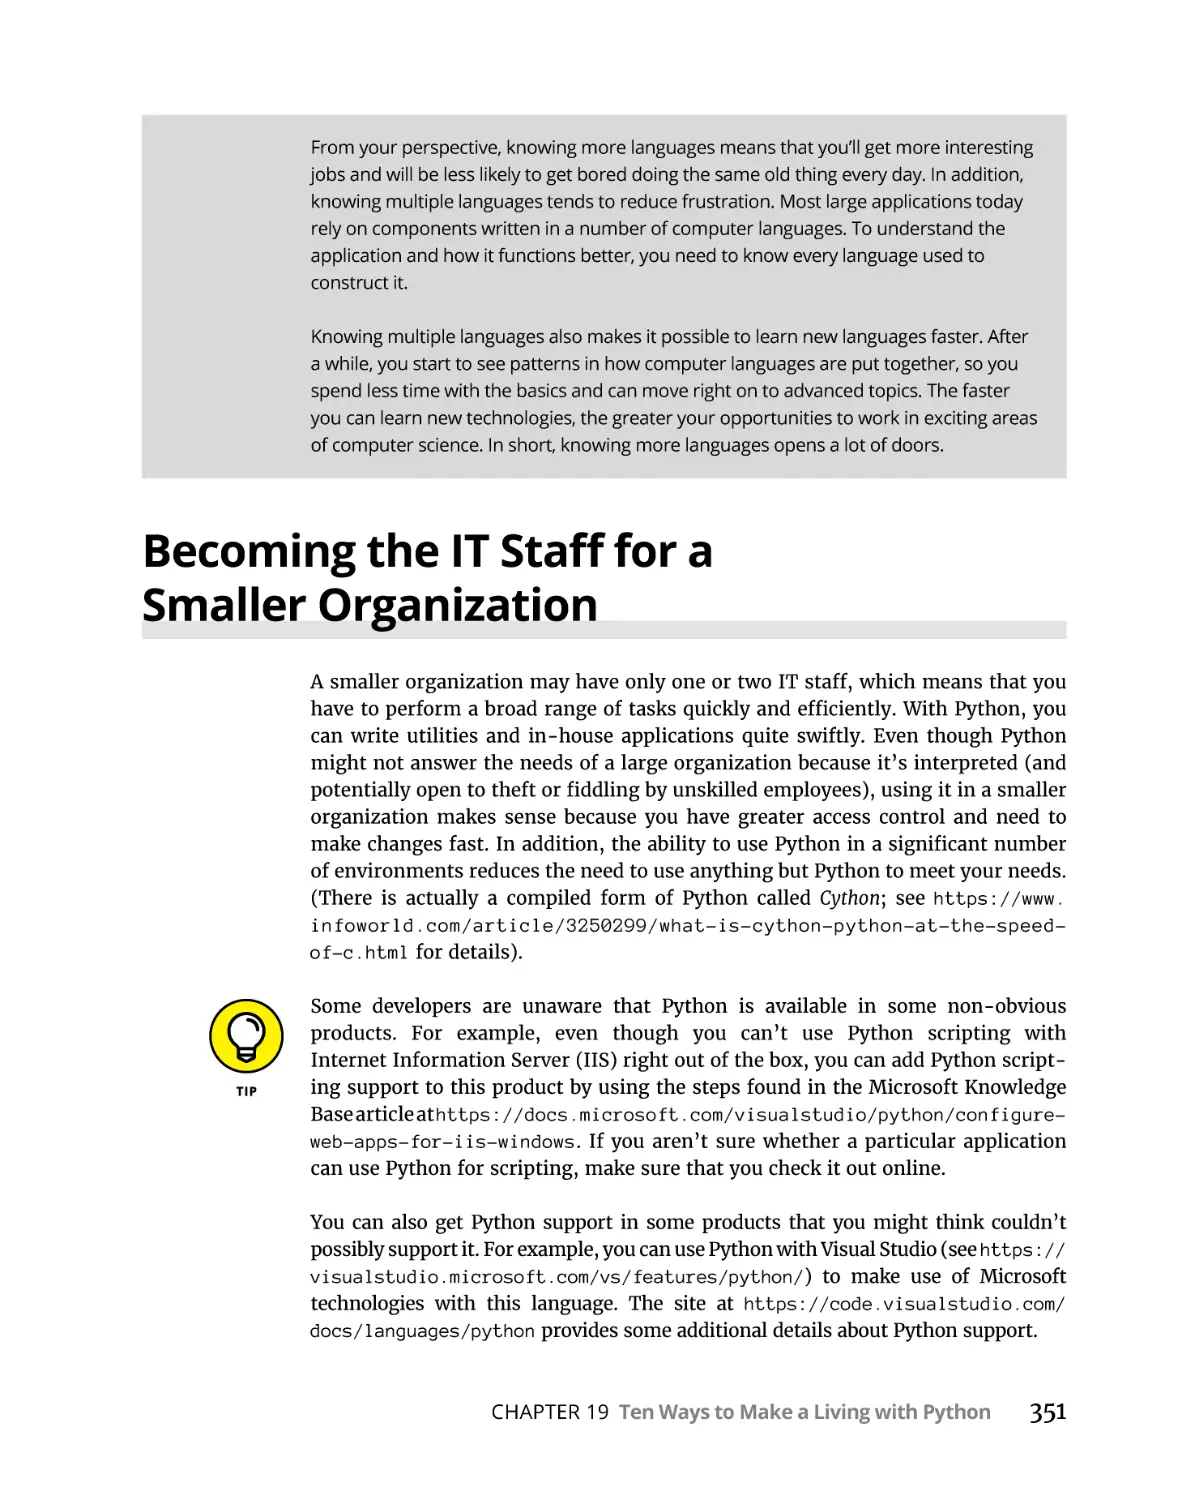 Becoming the IT Staff for a Smaller Organization